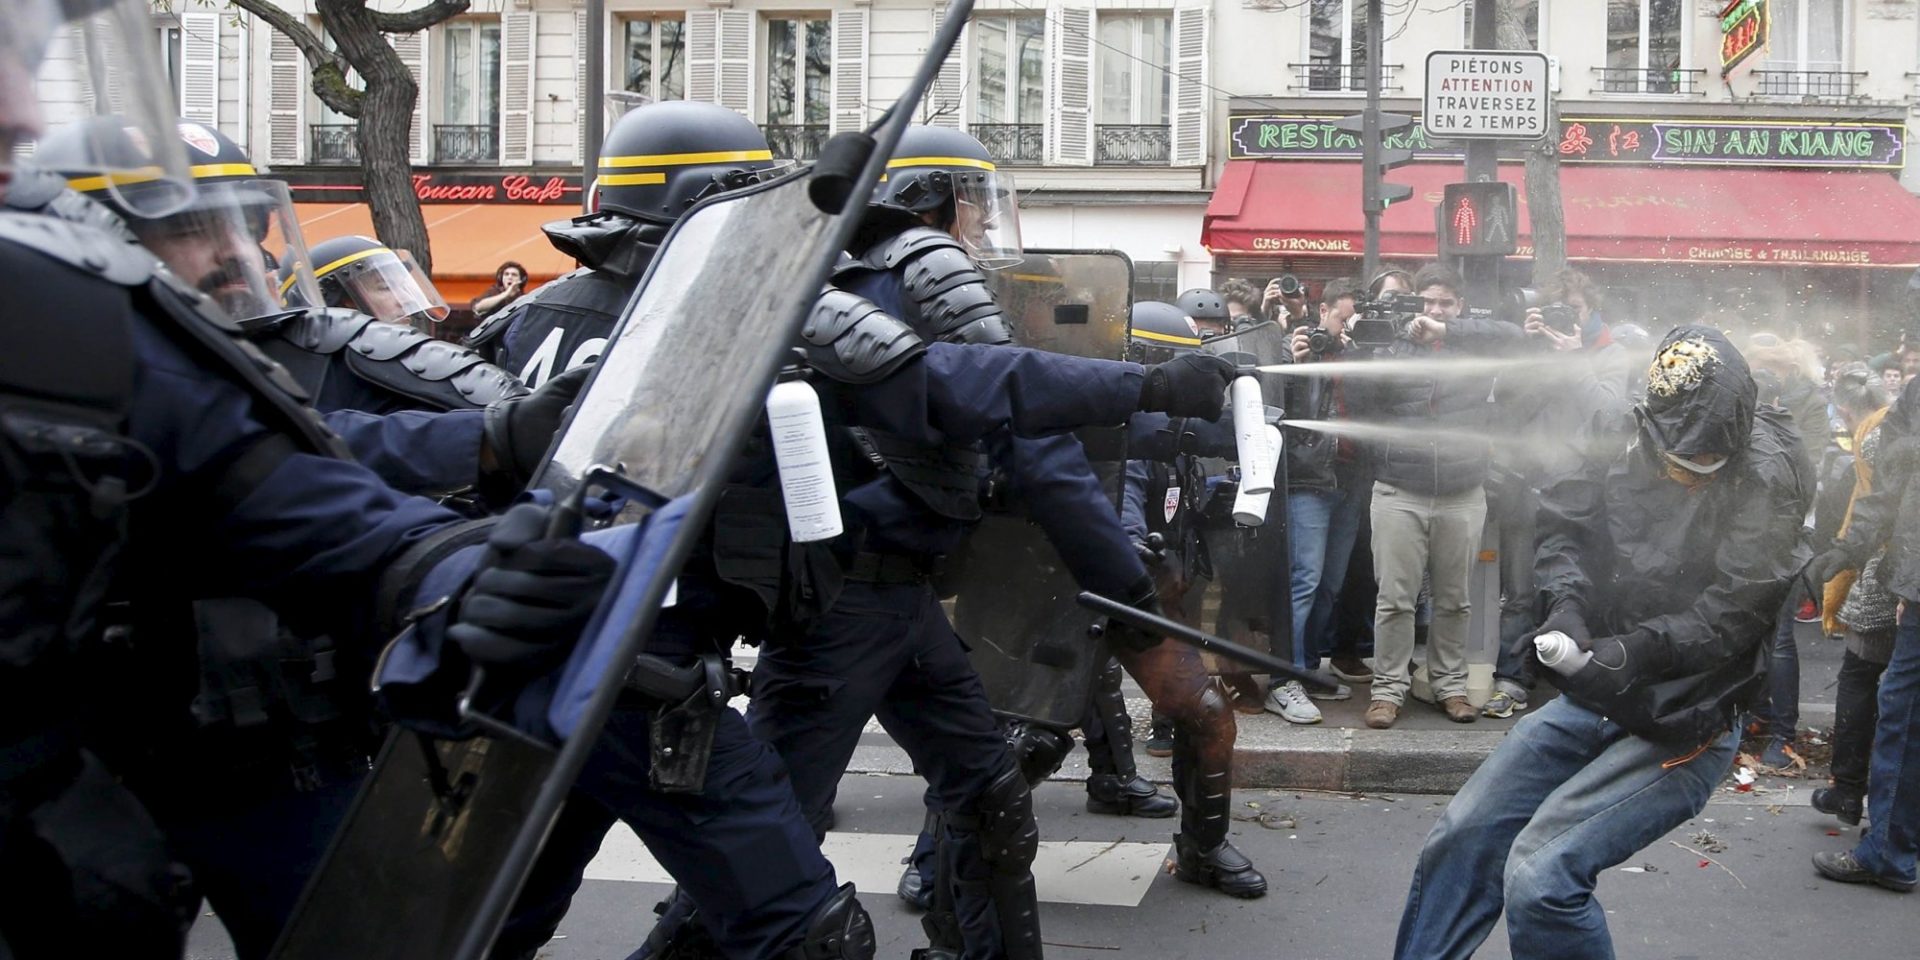 Demonstrators clash with CRS riot policemen near the Place de la Republique after the cancellation of a planned climate march following shootings in the French capital, ahead of the World Climate Change Conference 2015 (COP21), in Paris, France, November 29, 2015.            REUTERS/Eric Gaillard      TPX IMAGES OF THE DAY